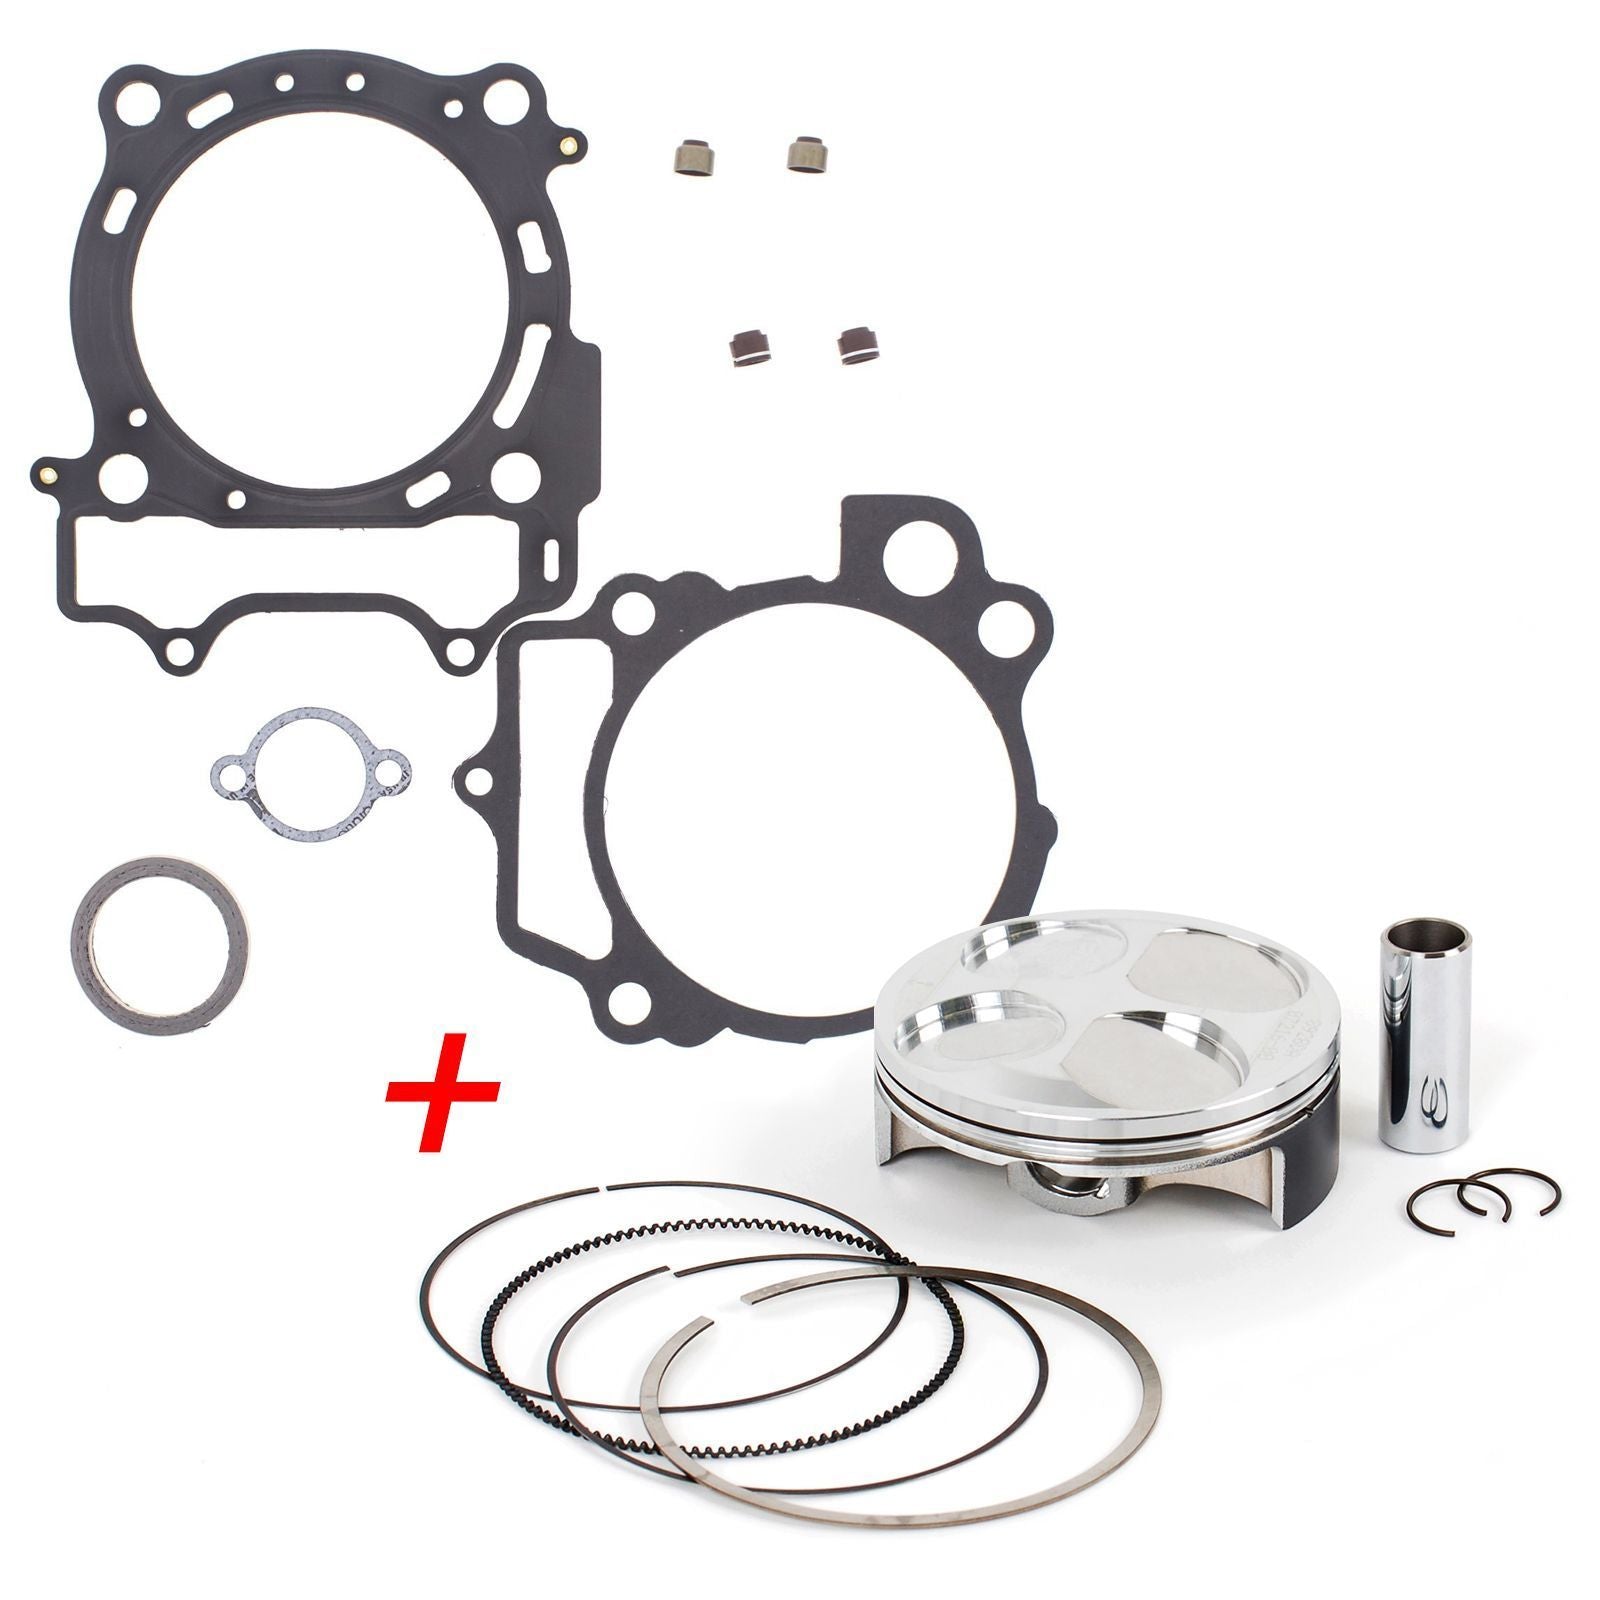 New Top End Rebuild Kit (B) For Yamaha WR250F 2015-2019 #ERTY031B